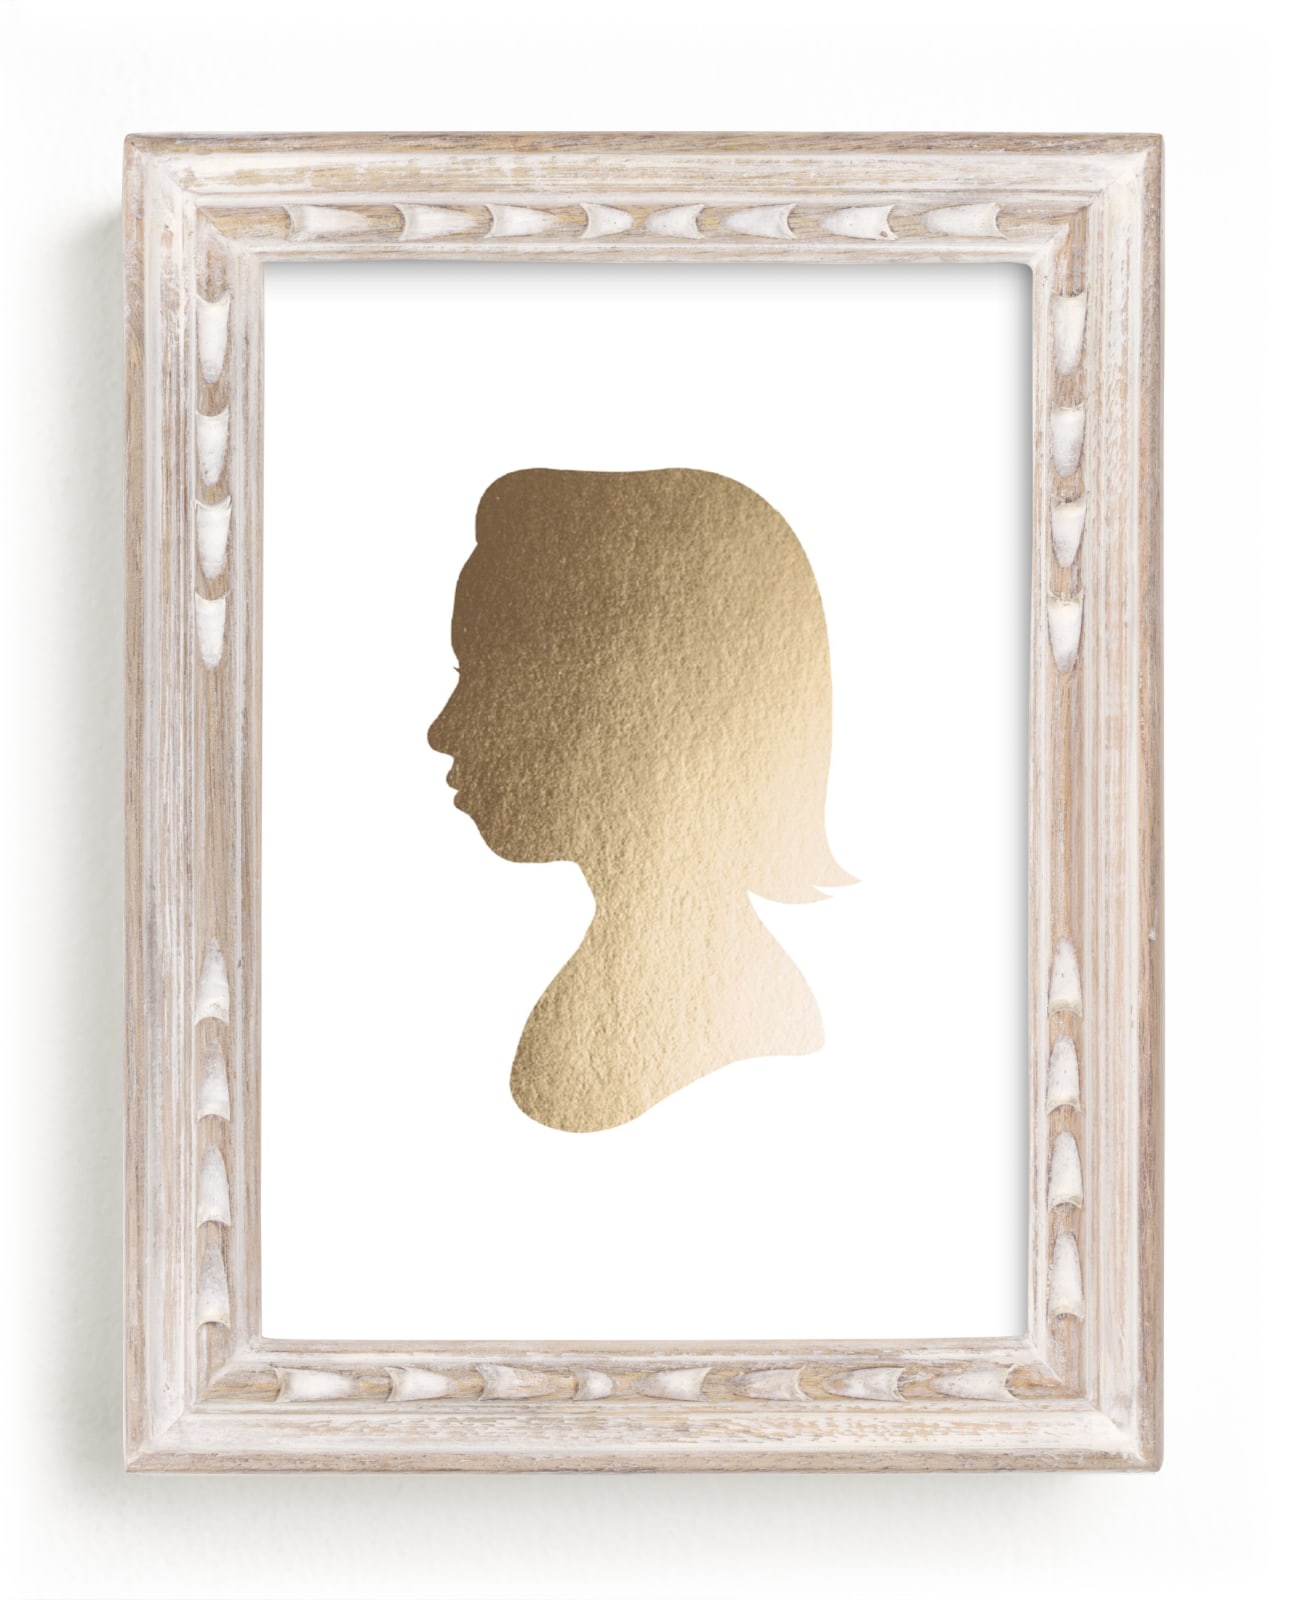 This is a gold silhouette art by Minted called Custom Silhouette Foil Art.